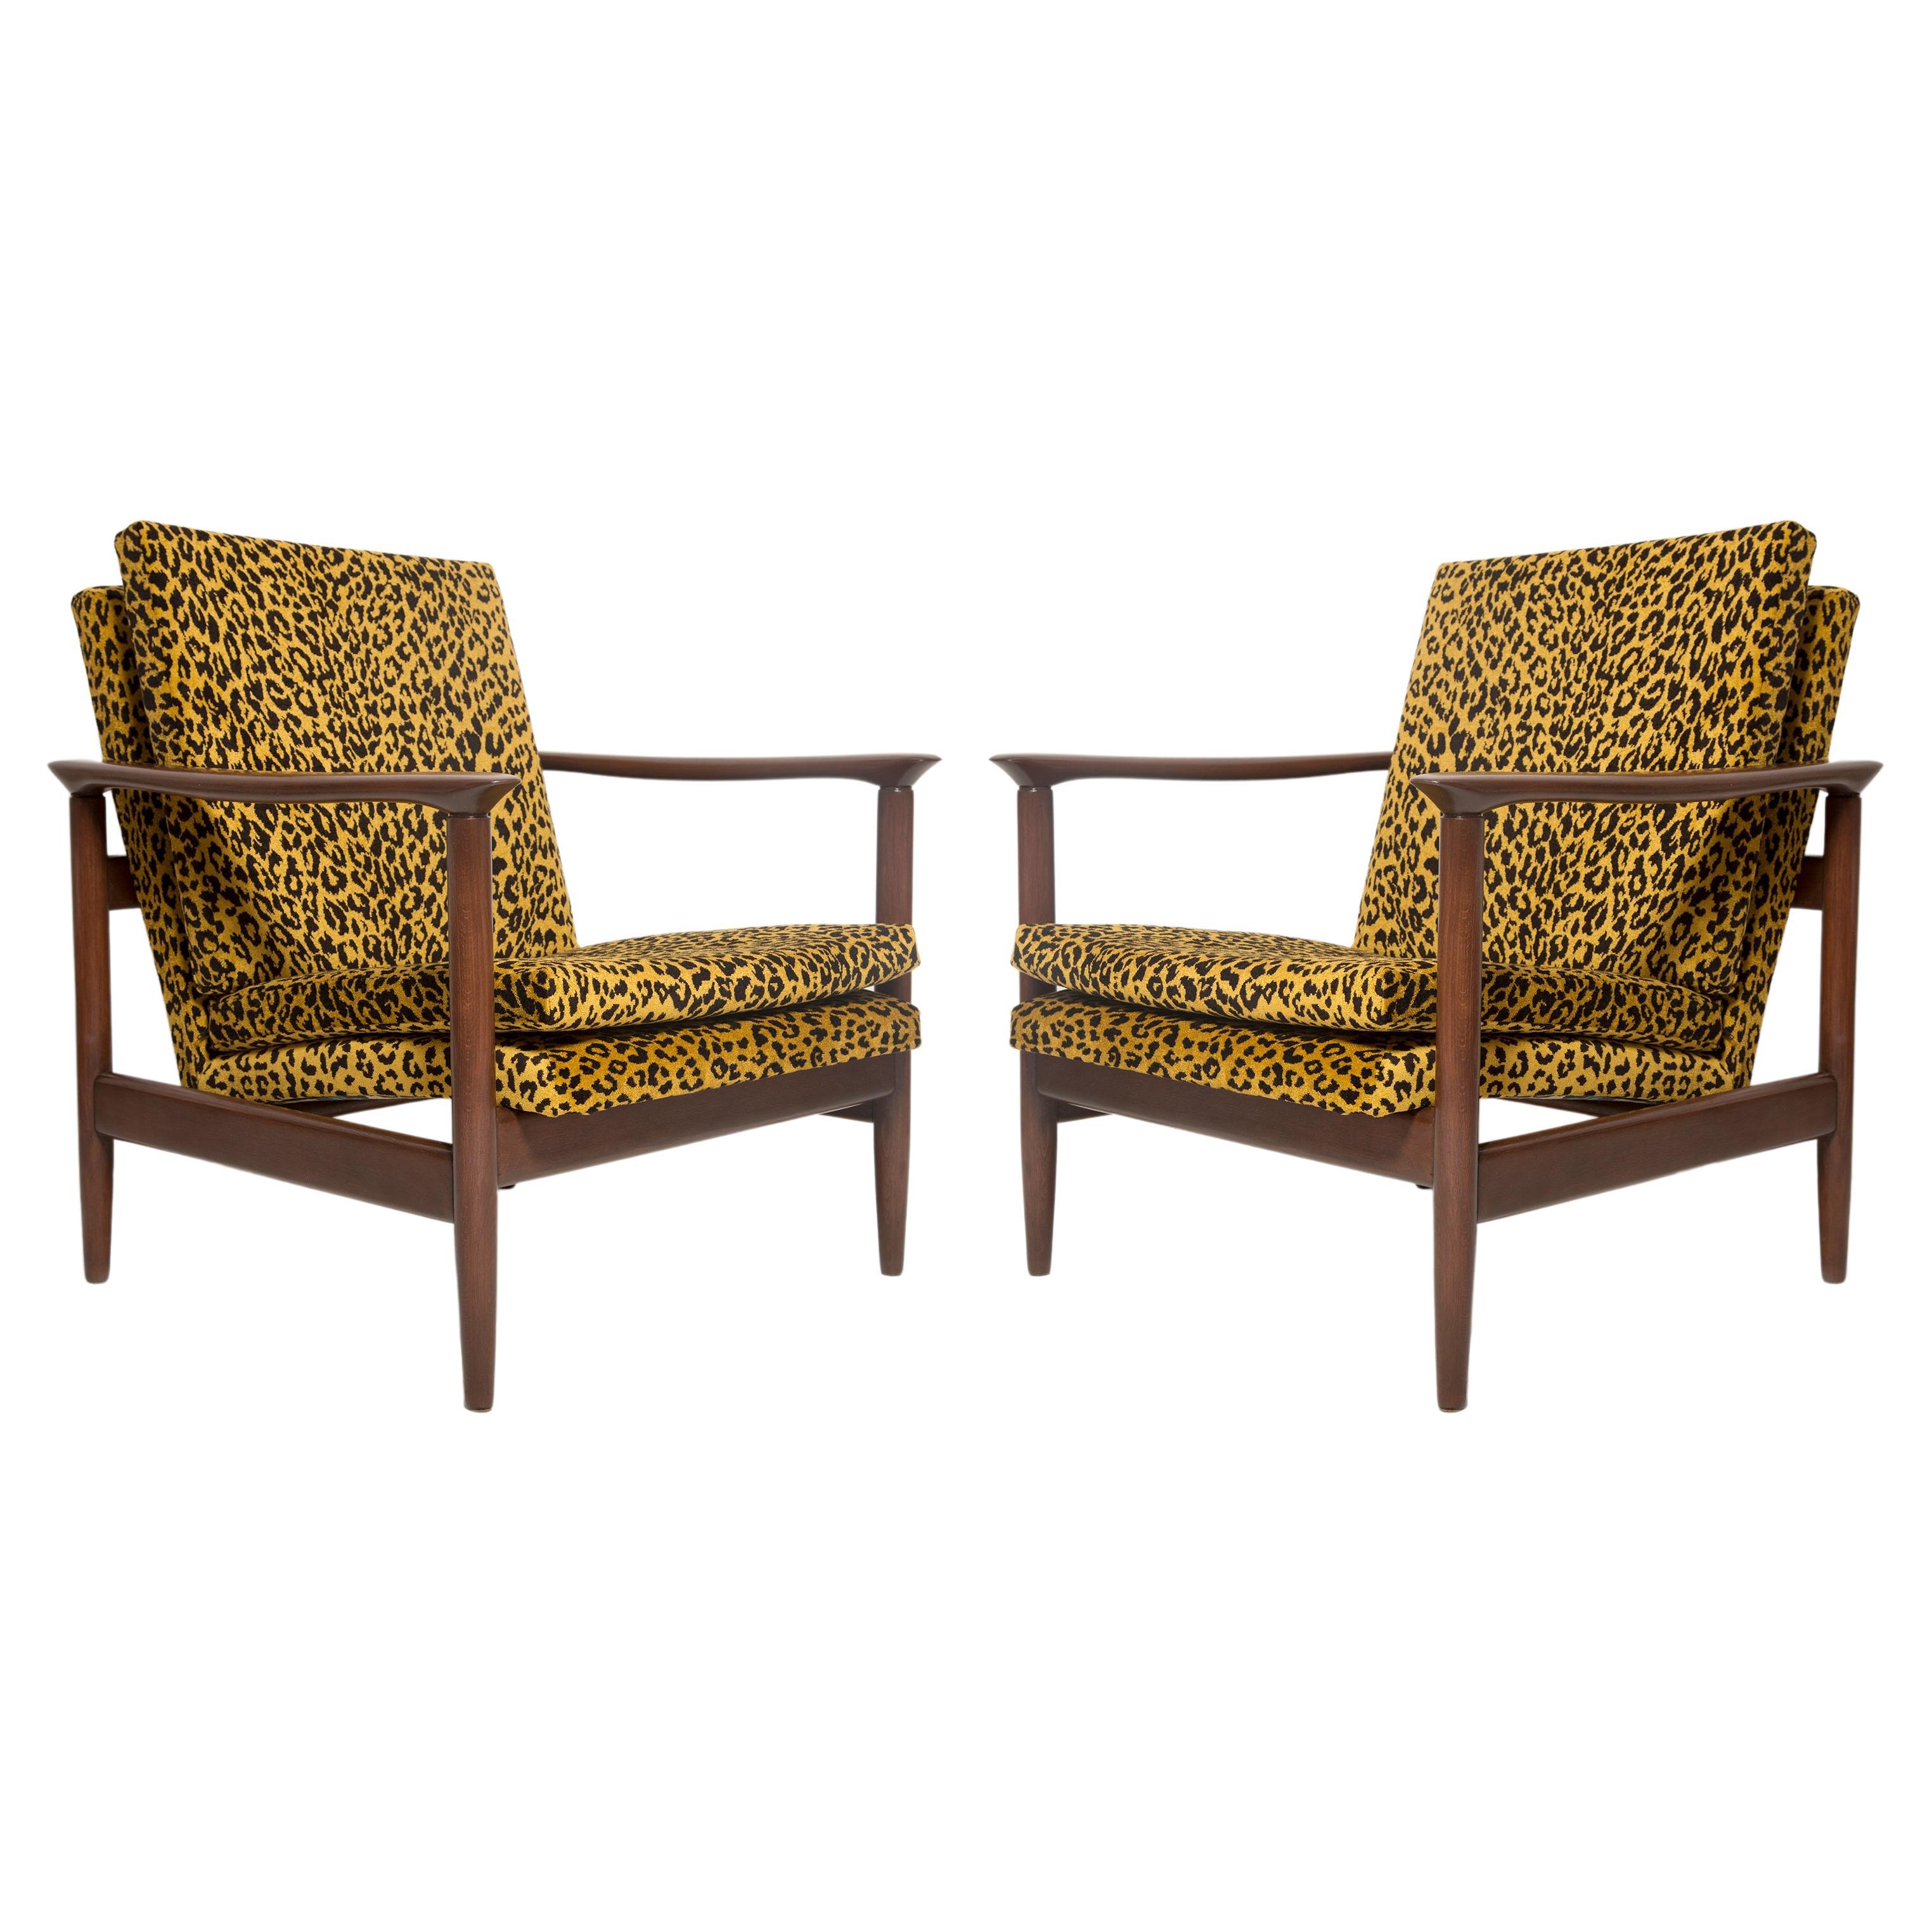 Pair of Midcentury Leopard Armchairs, GFM 142, Edmund Homa, Europe, 1960s For Sale